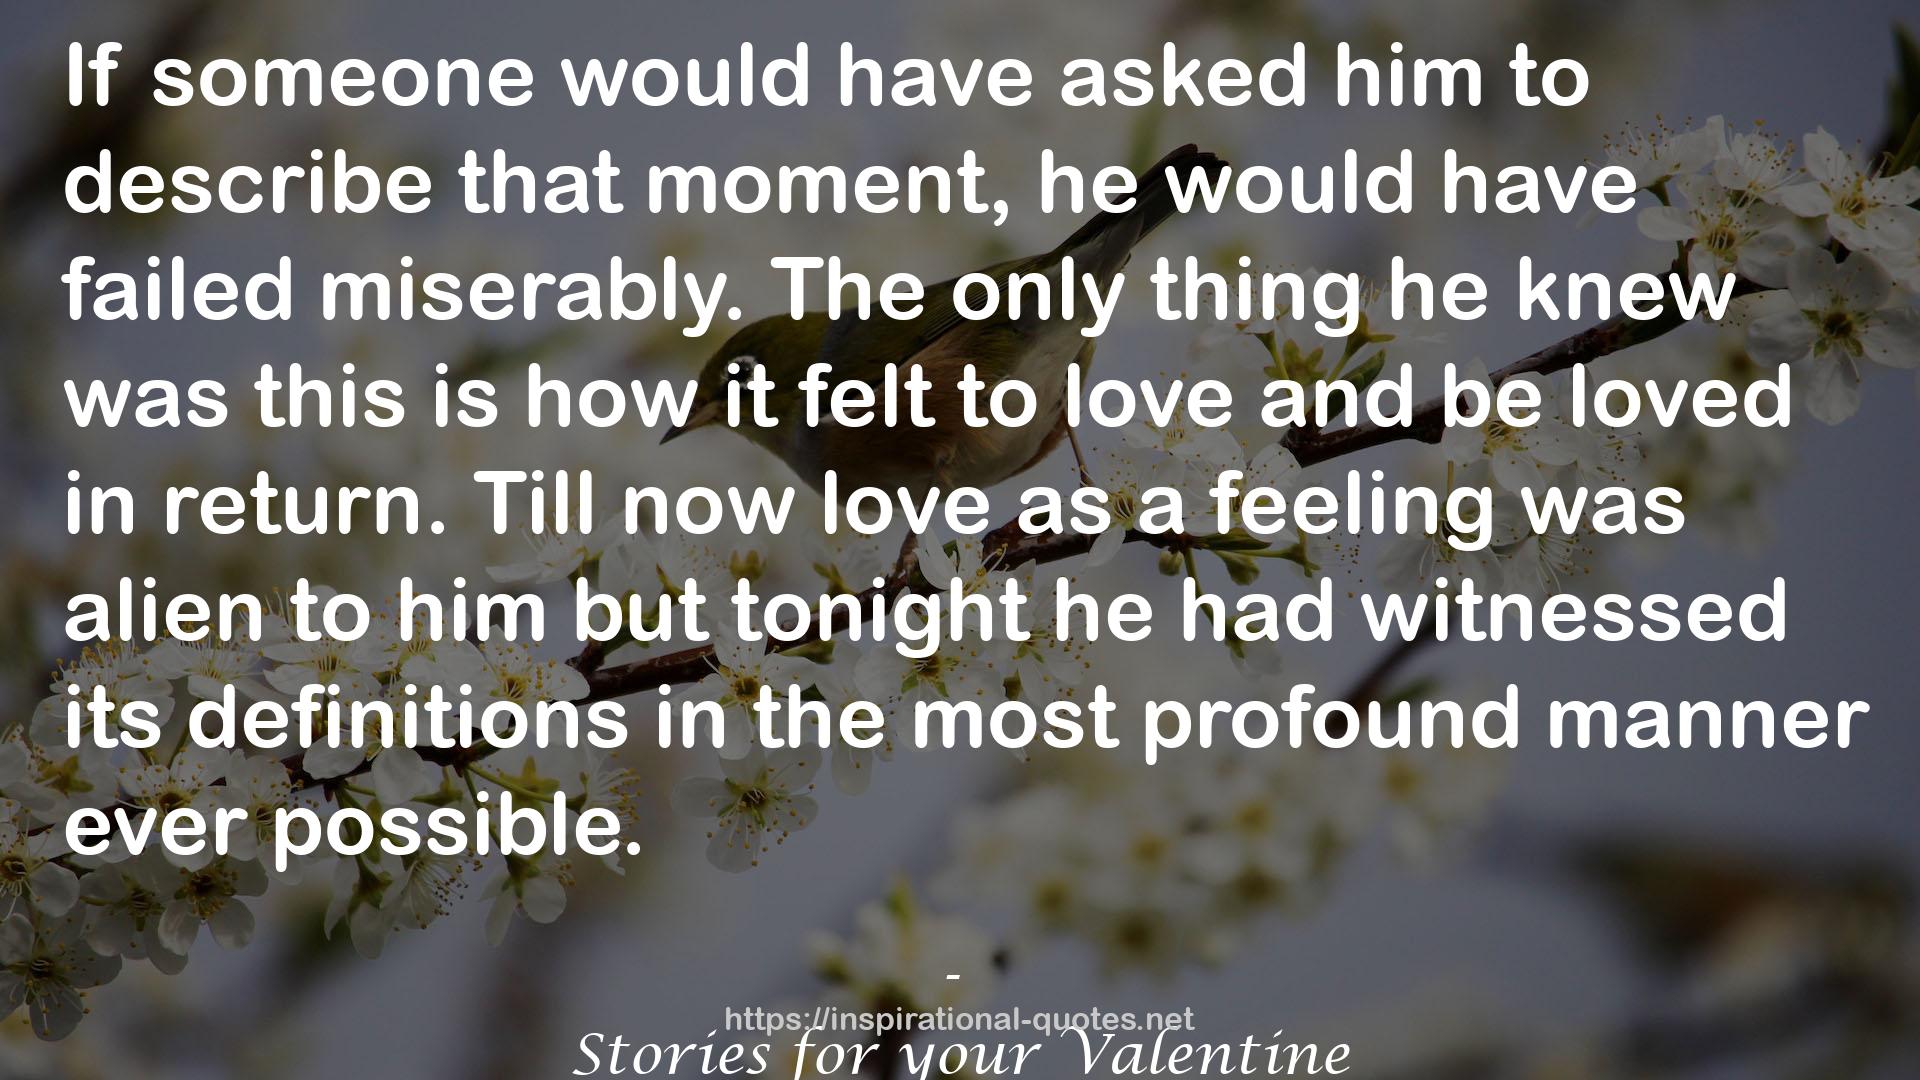 Stories for your Valentine QUOTES